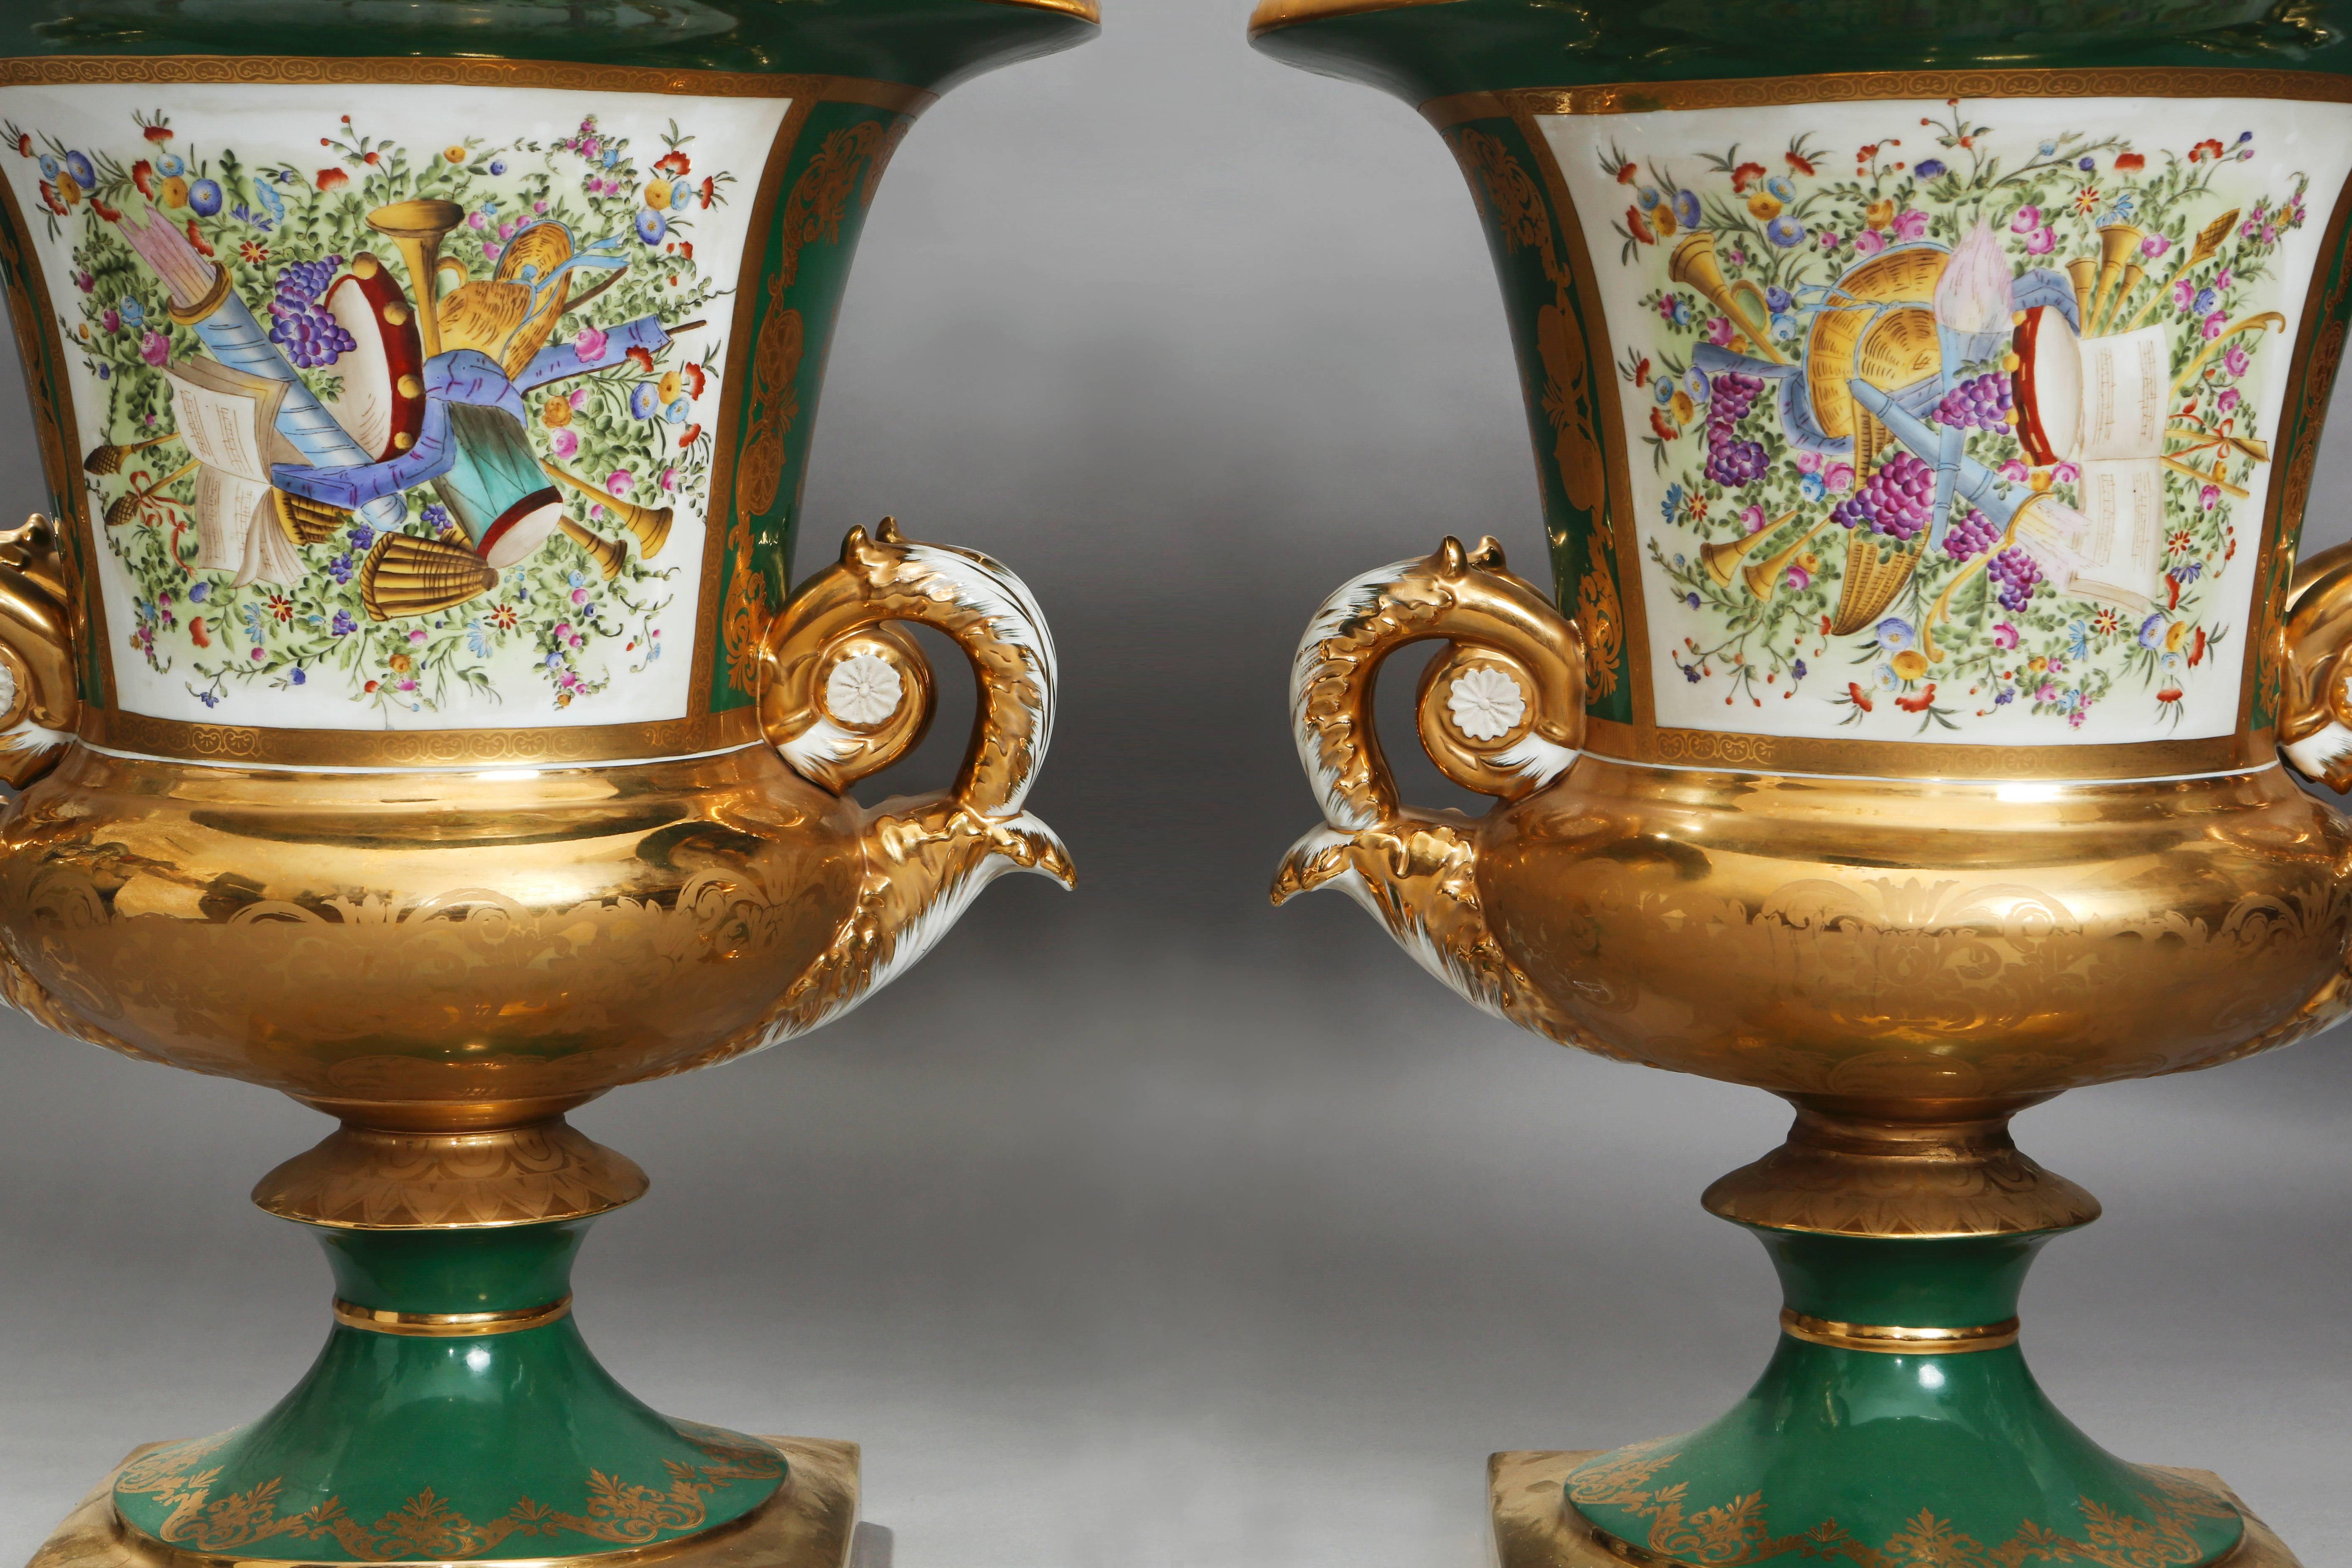 A pair of large 19th century Russian gardner porcelain campana urns. The urns are molded with a square plinth-like base. Each feature green backgrounds with heavy decorative gold gilding, that has patterns of its own within it created through the